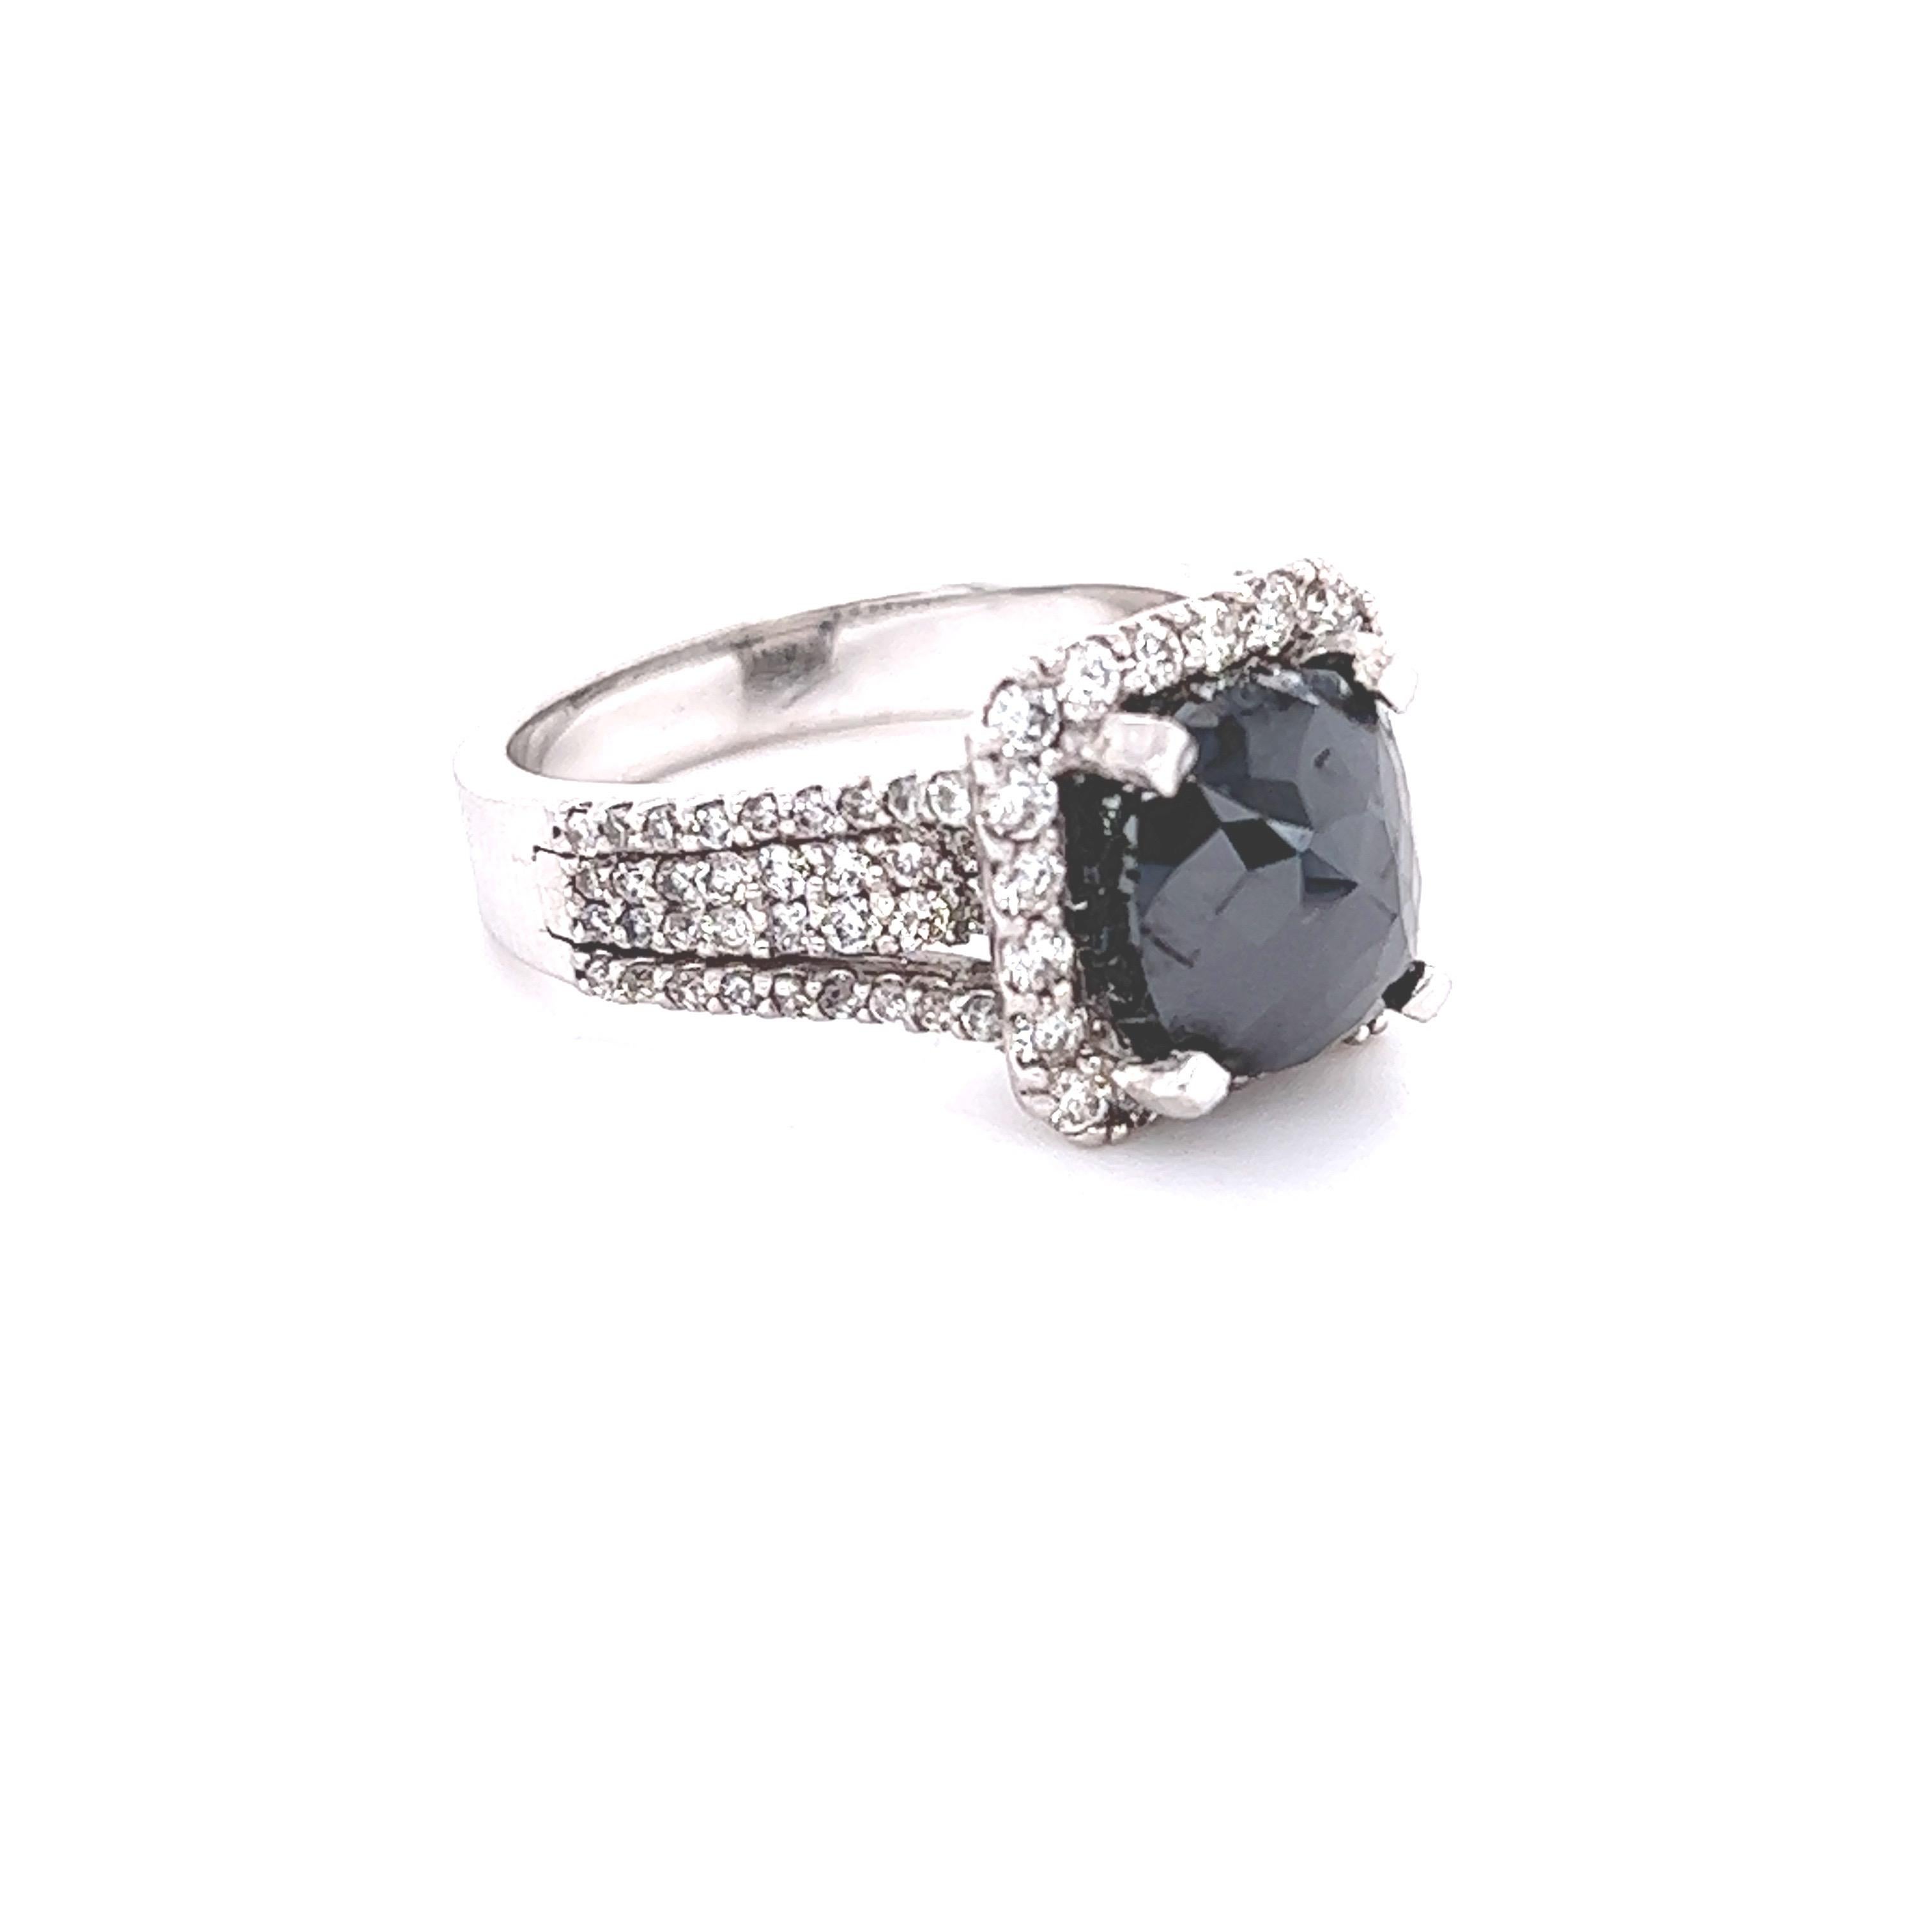 The Natural Cushion Cut Black Diamond is 3.75 Carats and is surrounded by 100 Round Cut Diamonds weighing 1.08 Carats (Clarity: VS, Color: H) The total carat weight of the ring is 4.83 Carats. The Black Diamond measures at 9 mm x 8 mm. 

Curated in